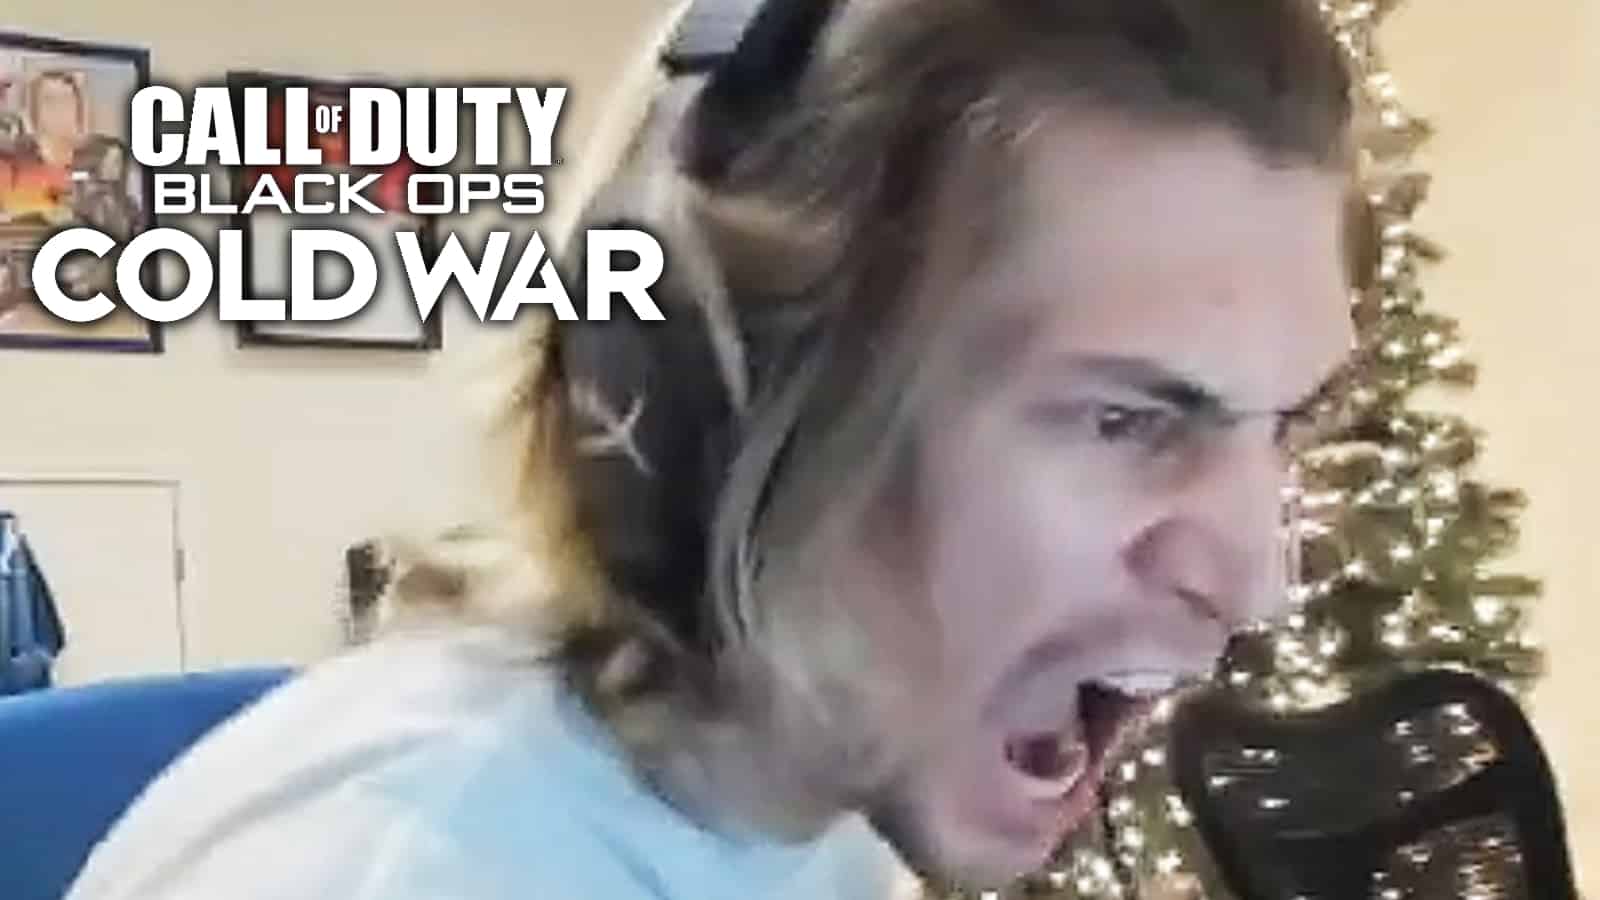 xQc and Call of Duty lobbies are a match made in trash-talk heaven